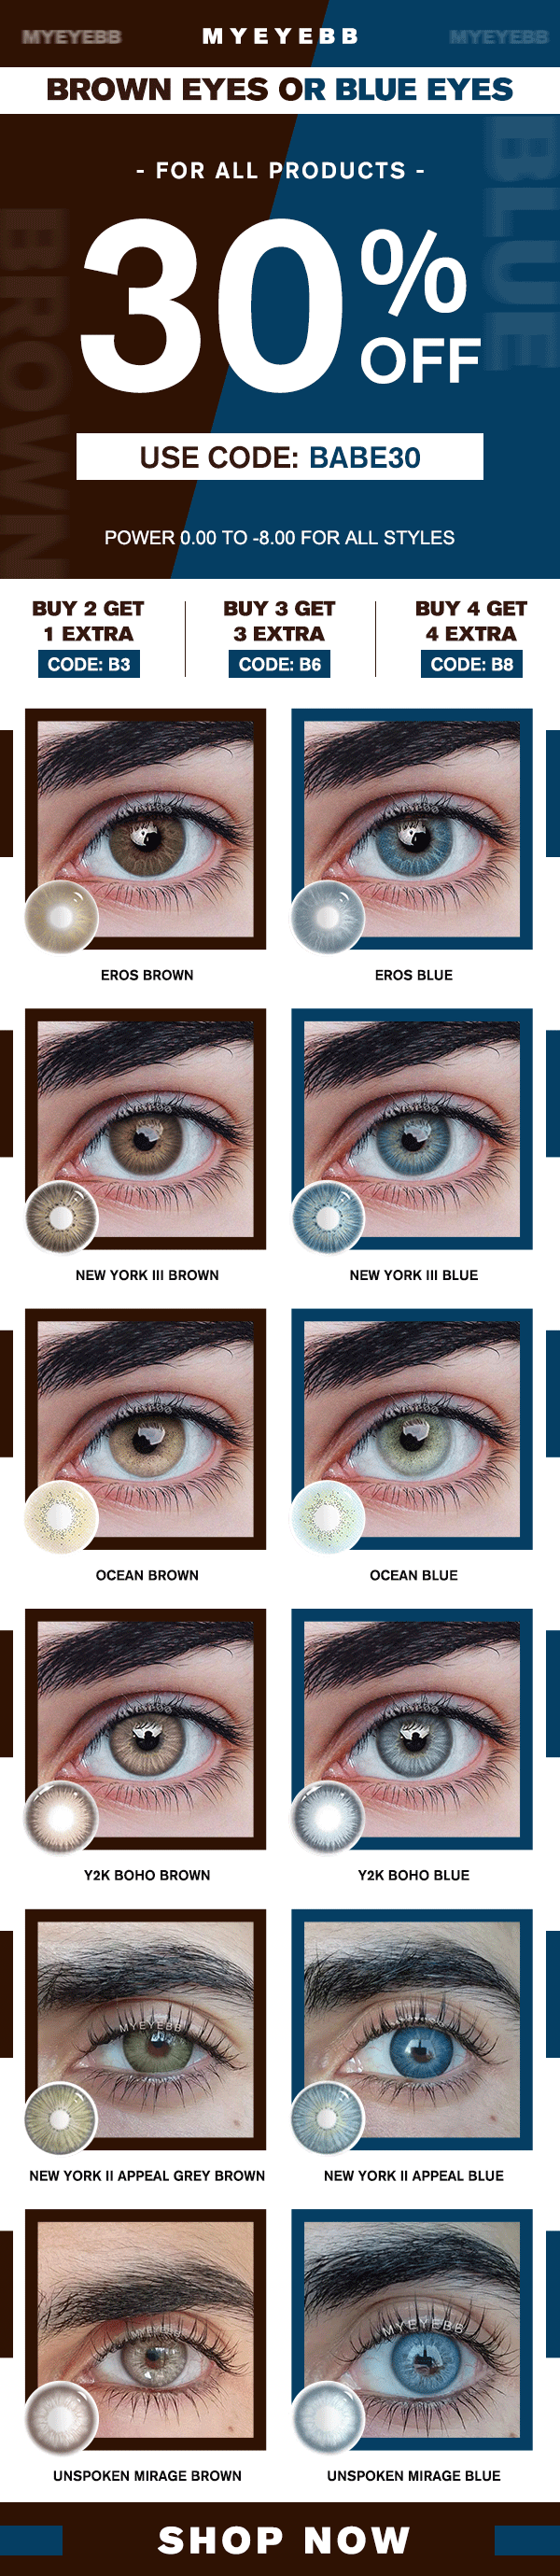 MYEYEBB BROWN EYES OR BLUE EYES - FOR ALL PRODUCTS - 0 USE CODE: BABE30 POWER 0.00 TO -8.00 FOR ALL STYLES BUY 2 GET BUY 3 GET BUY 4 GET 1 EXTRA 3 EXTRA 4 EXTRA EROS BROWN EROS BLUE NEW YORK Ill BROWN OCEAN BLUE NEW YORK Il APPEAL GREY BROWN UNSPOKEN MIRAGE BROWN UNSPOKEN MIRAGE BLUE SHOP NOW 